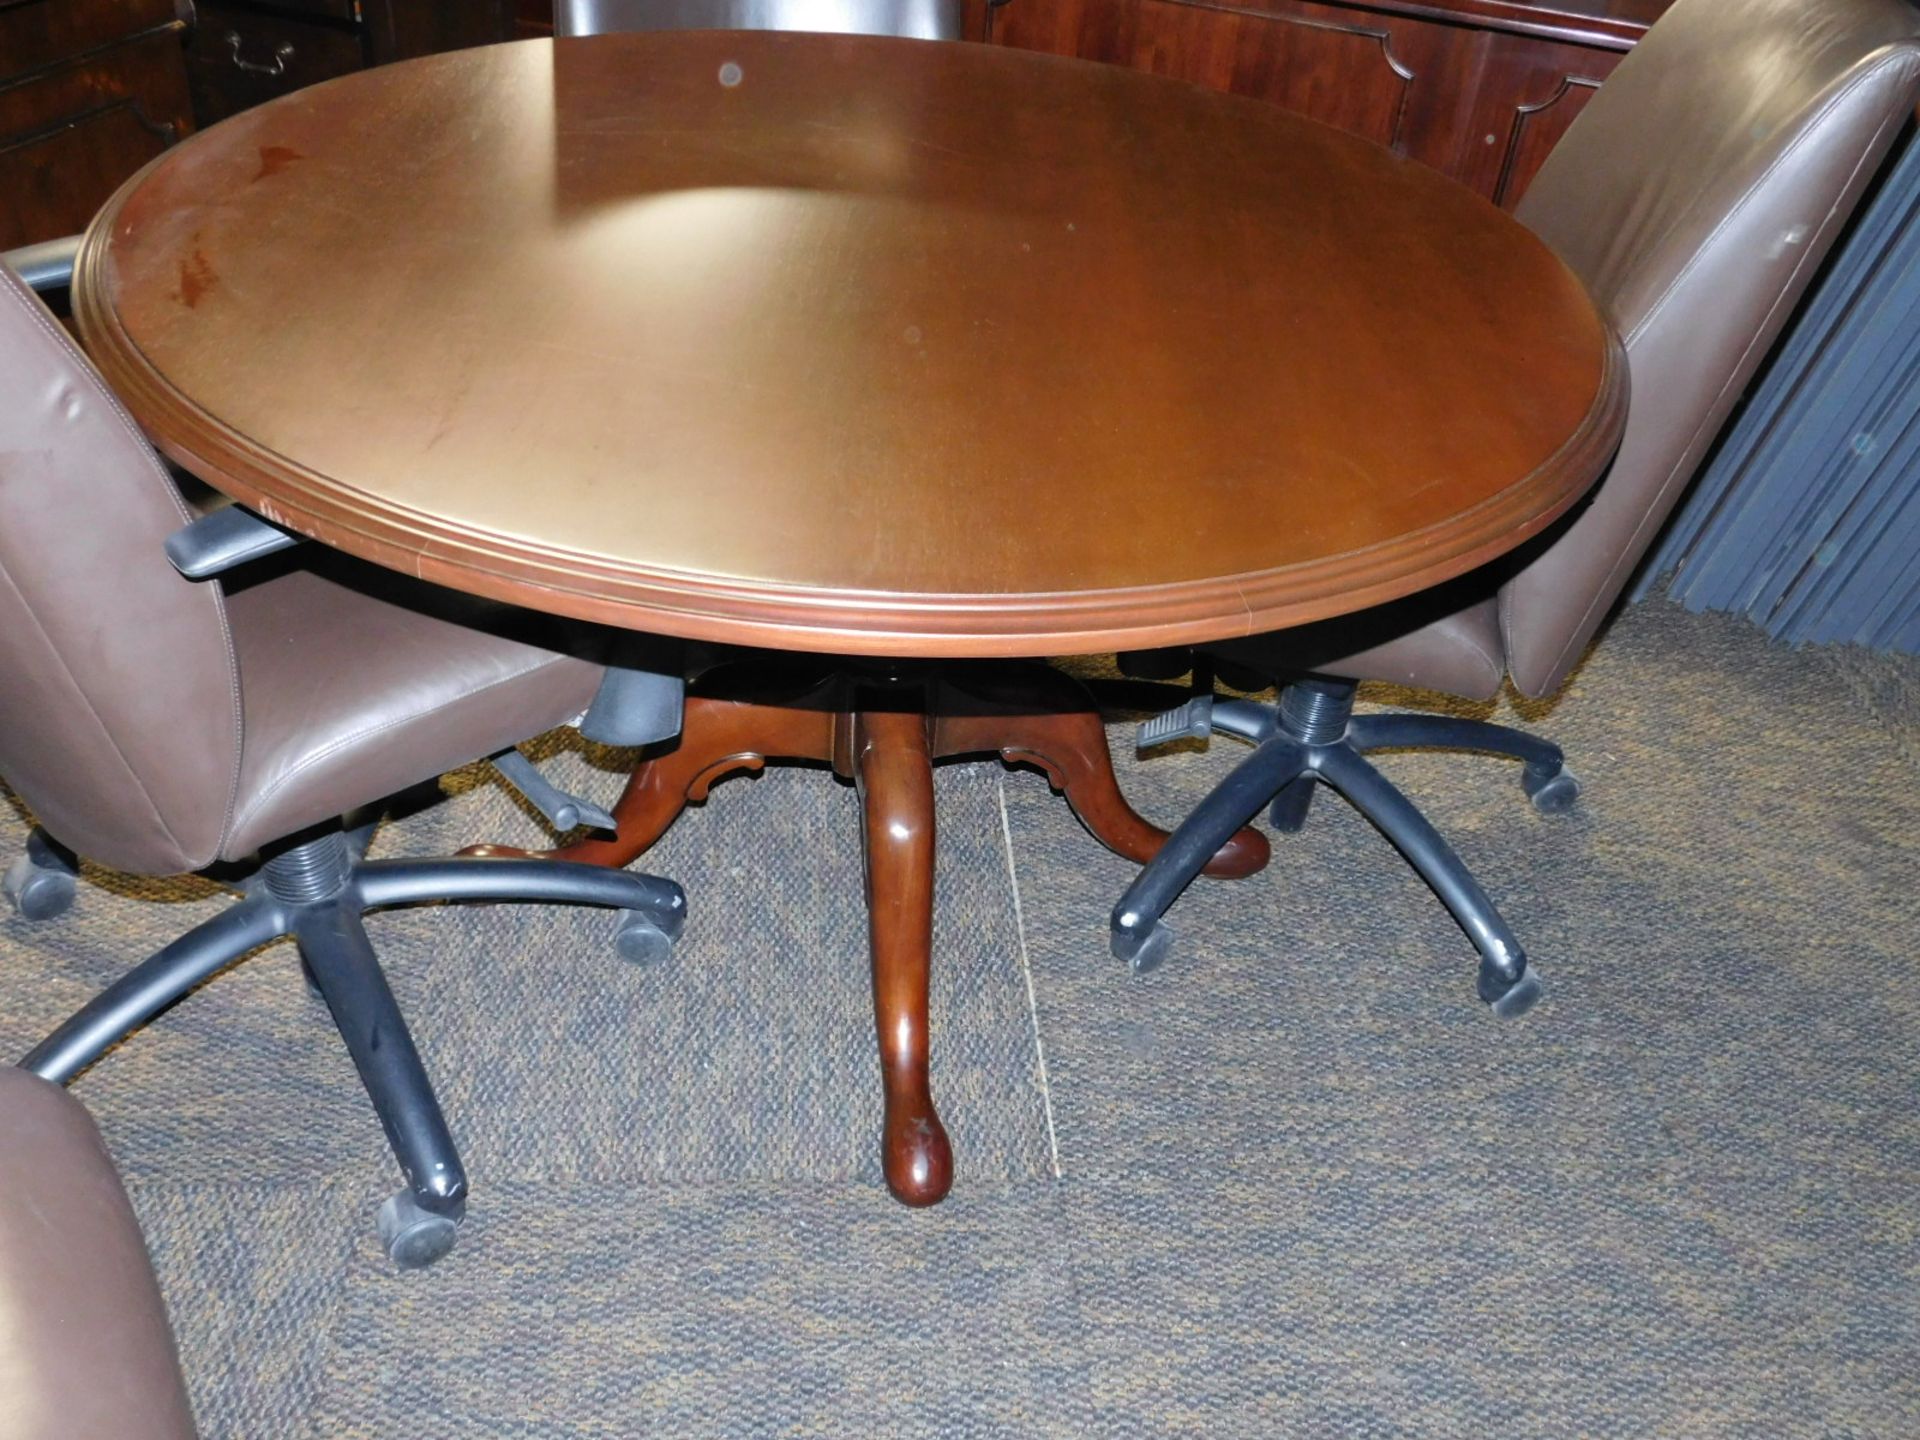 KIMBALL PRESIDENTIAL SERIES 48" CIRCULAR CONFERENCE TABLE, ORNATELY TURNED & CARVED PEDESTAL